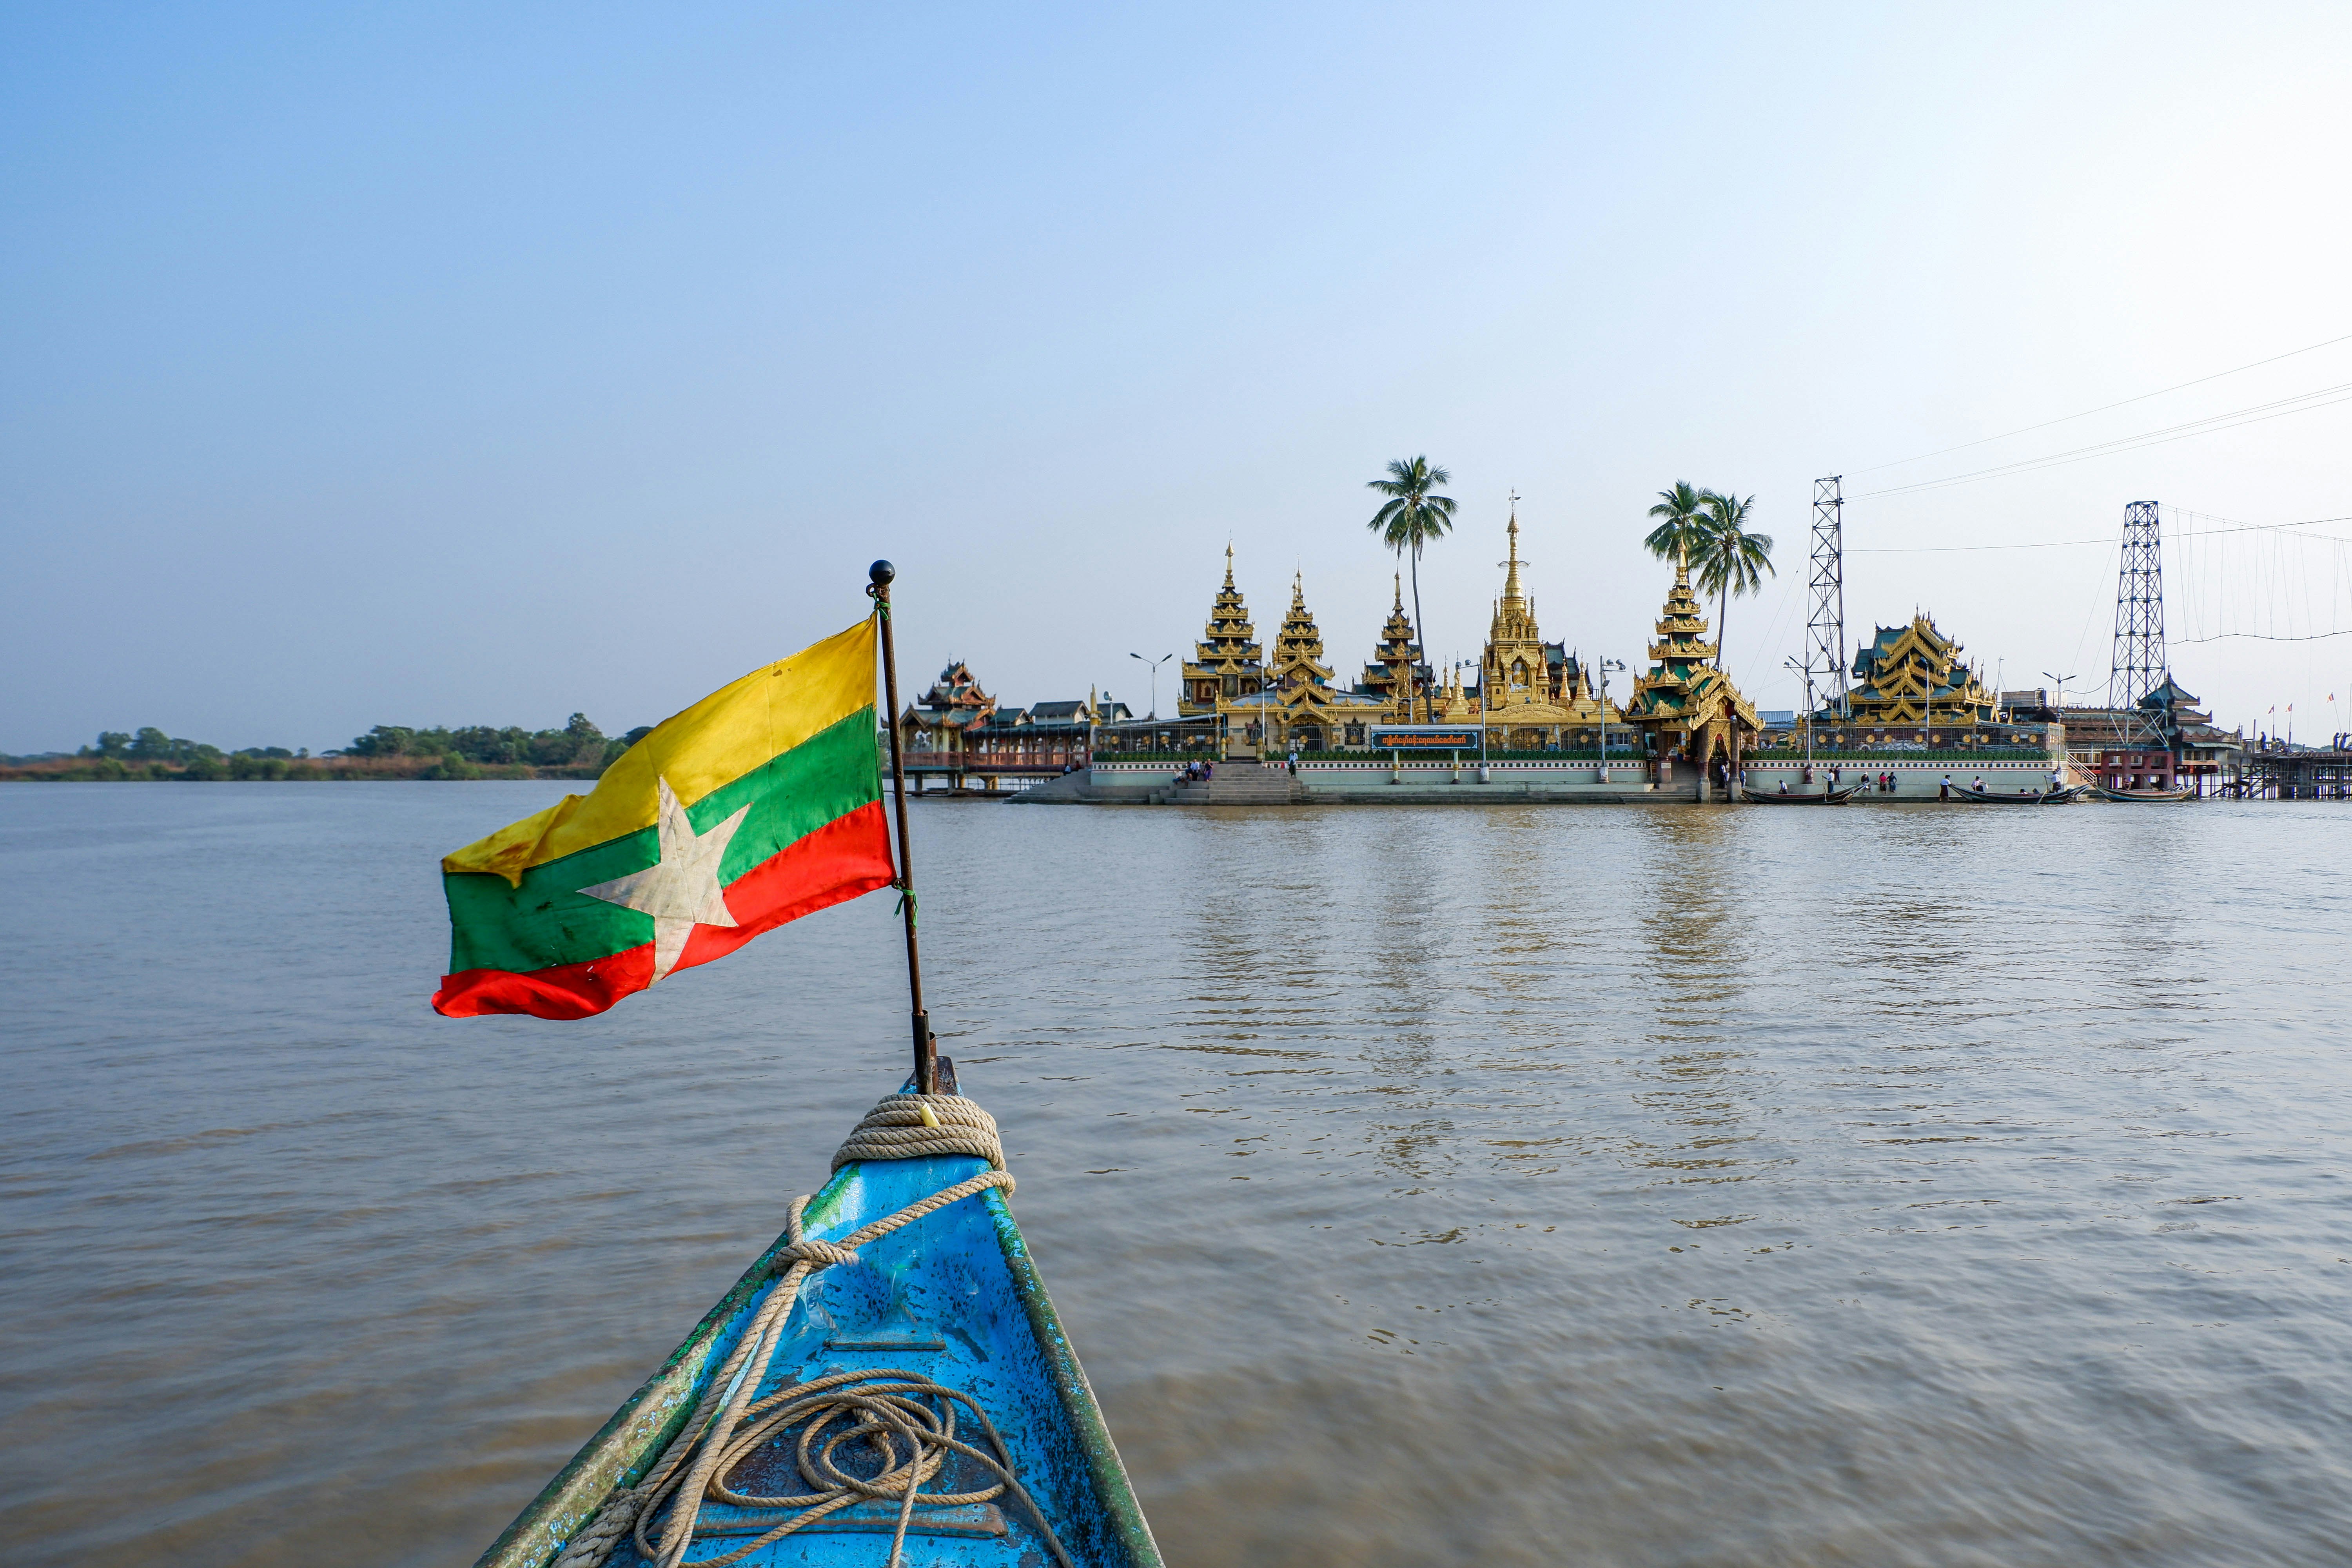 The front of a boat, flying the yellow, green and red flag of Myanmar, points in the direction of Yele river pagoda. A golden Buddhist pagoda built on a platform juts out into the river.